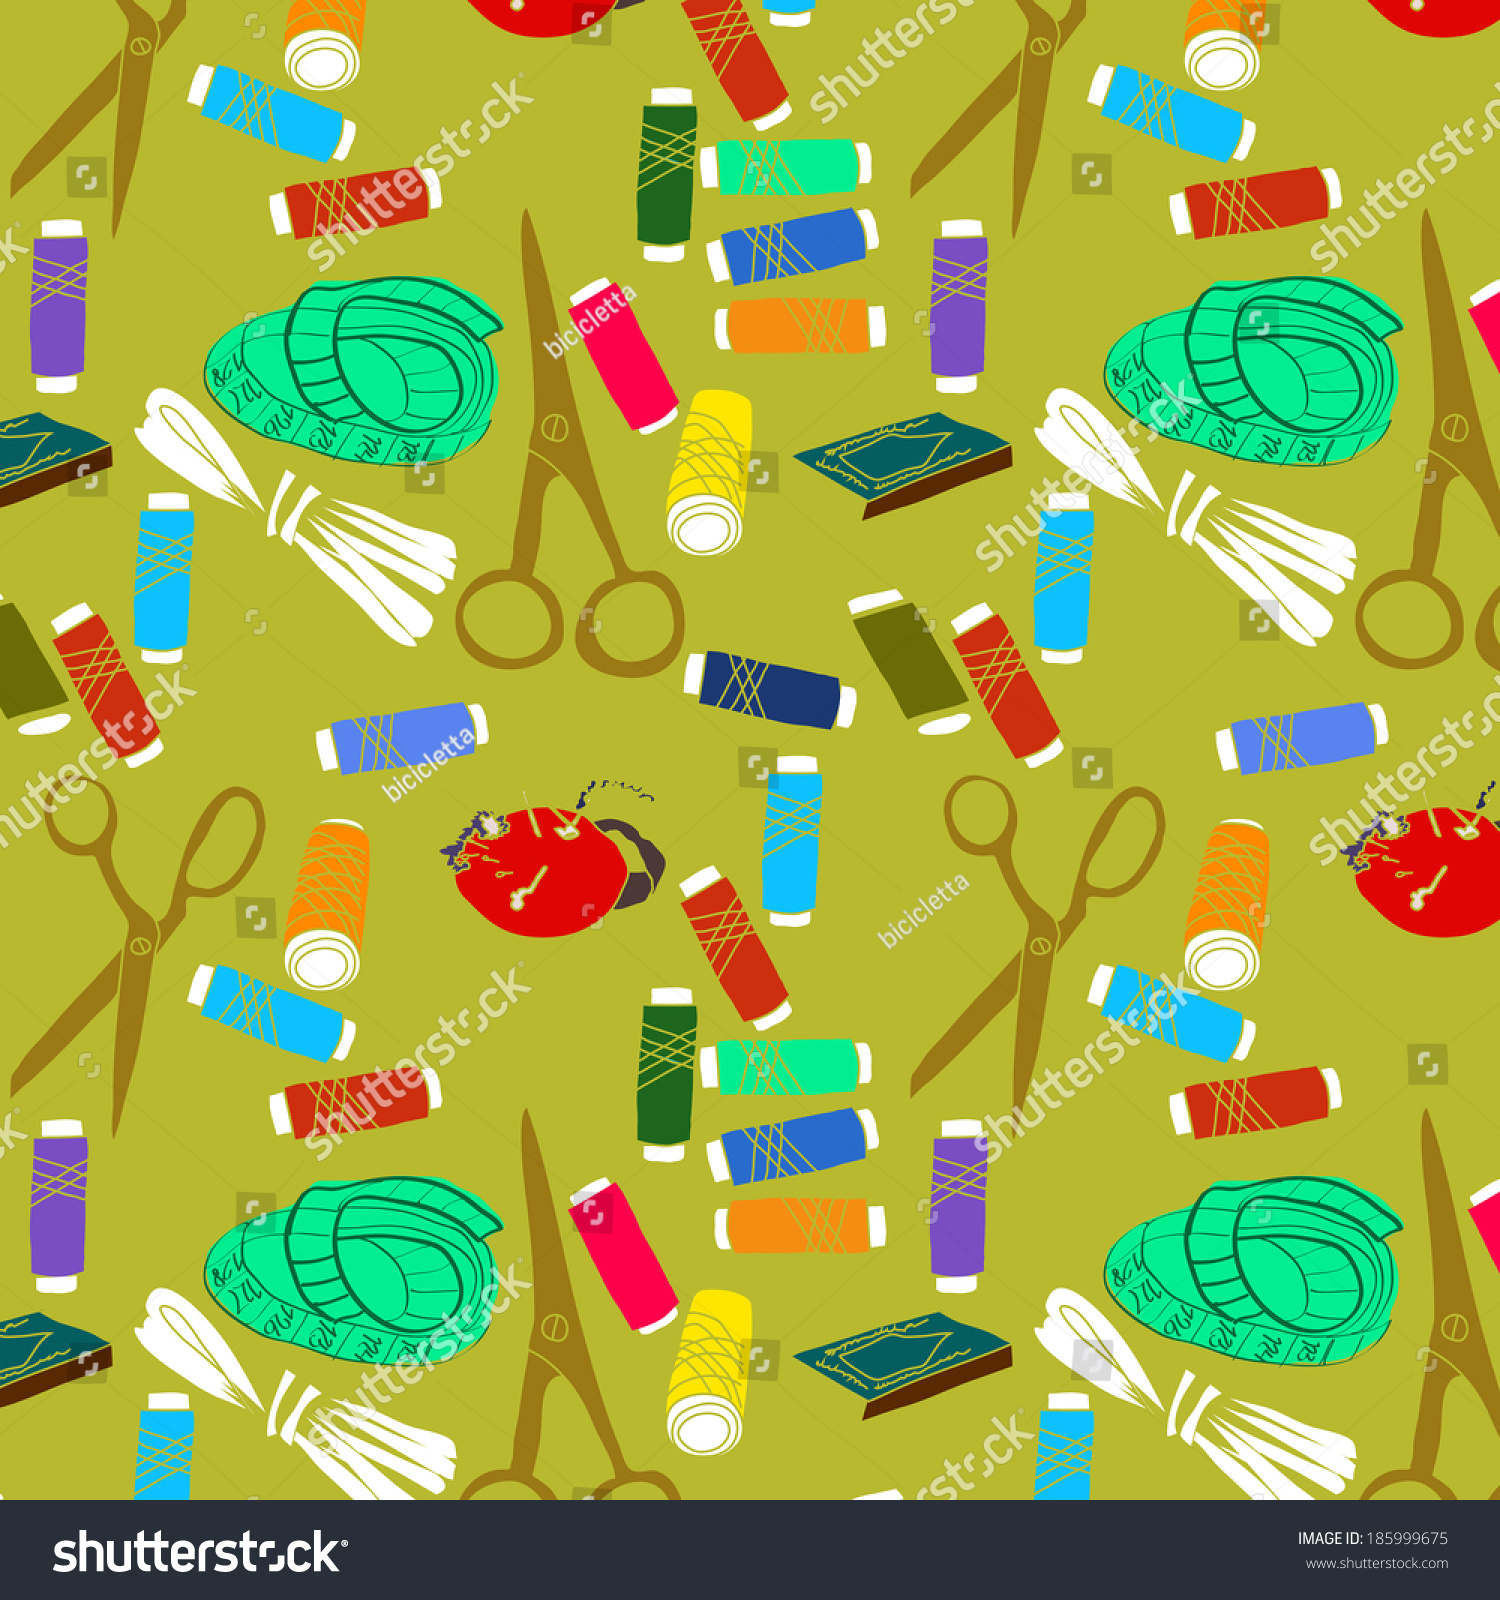 Sewing Tools On Ocher Background My Stock Illustration 185999675